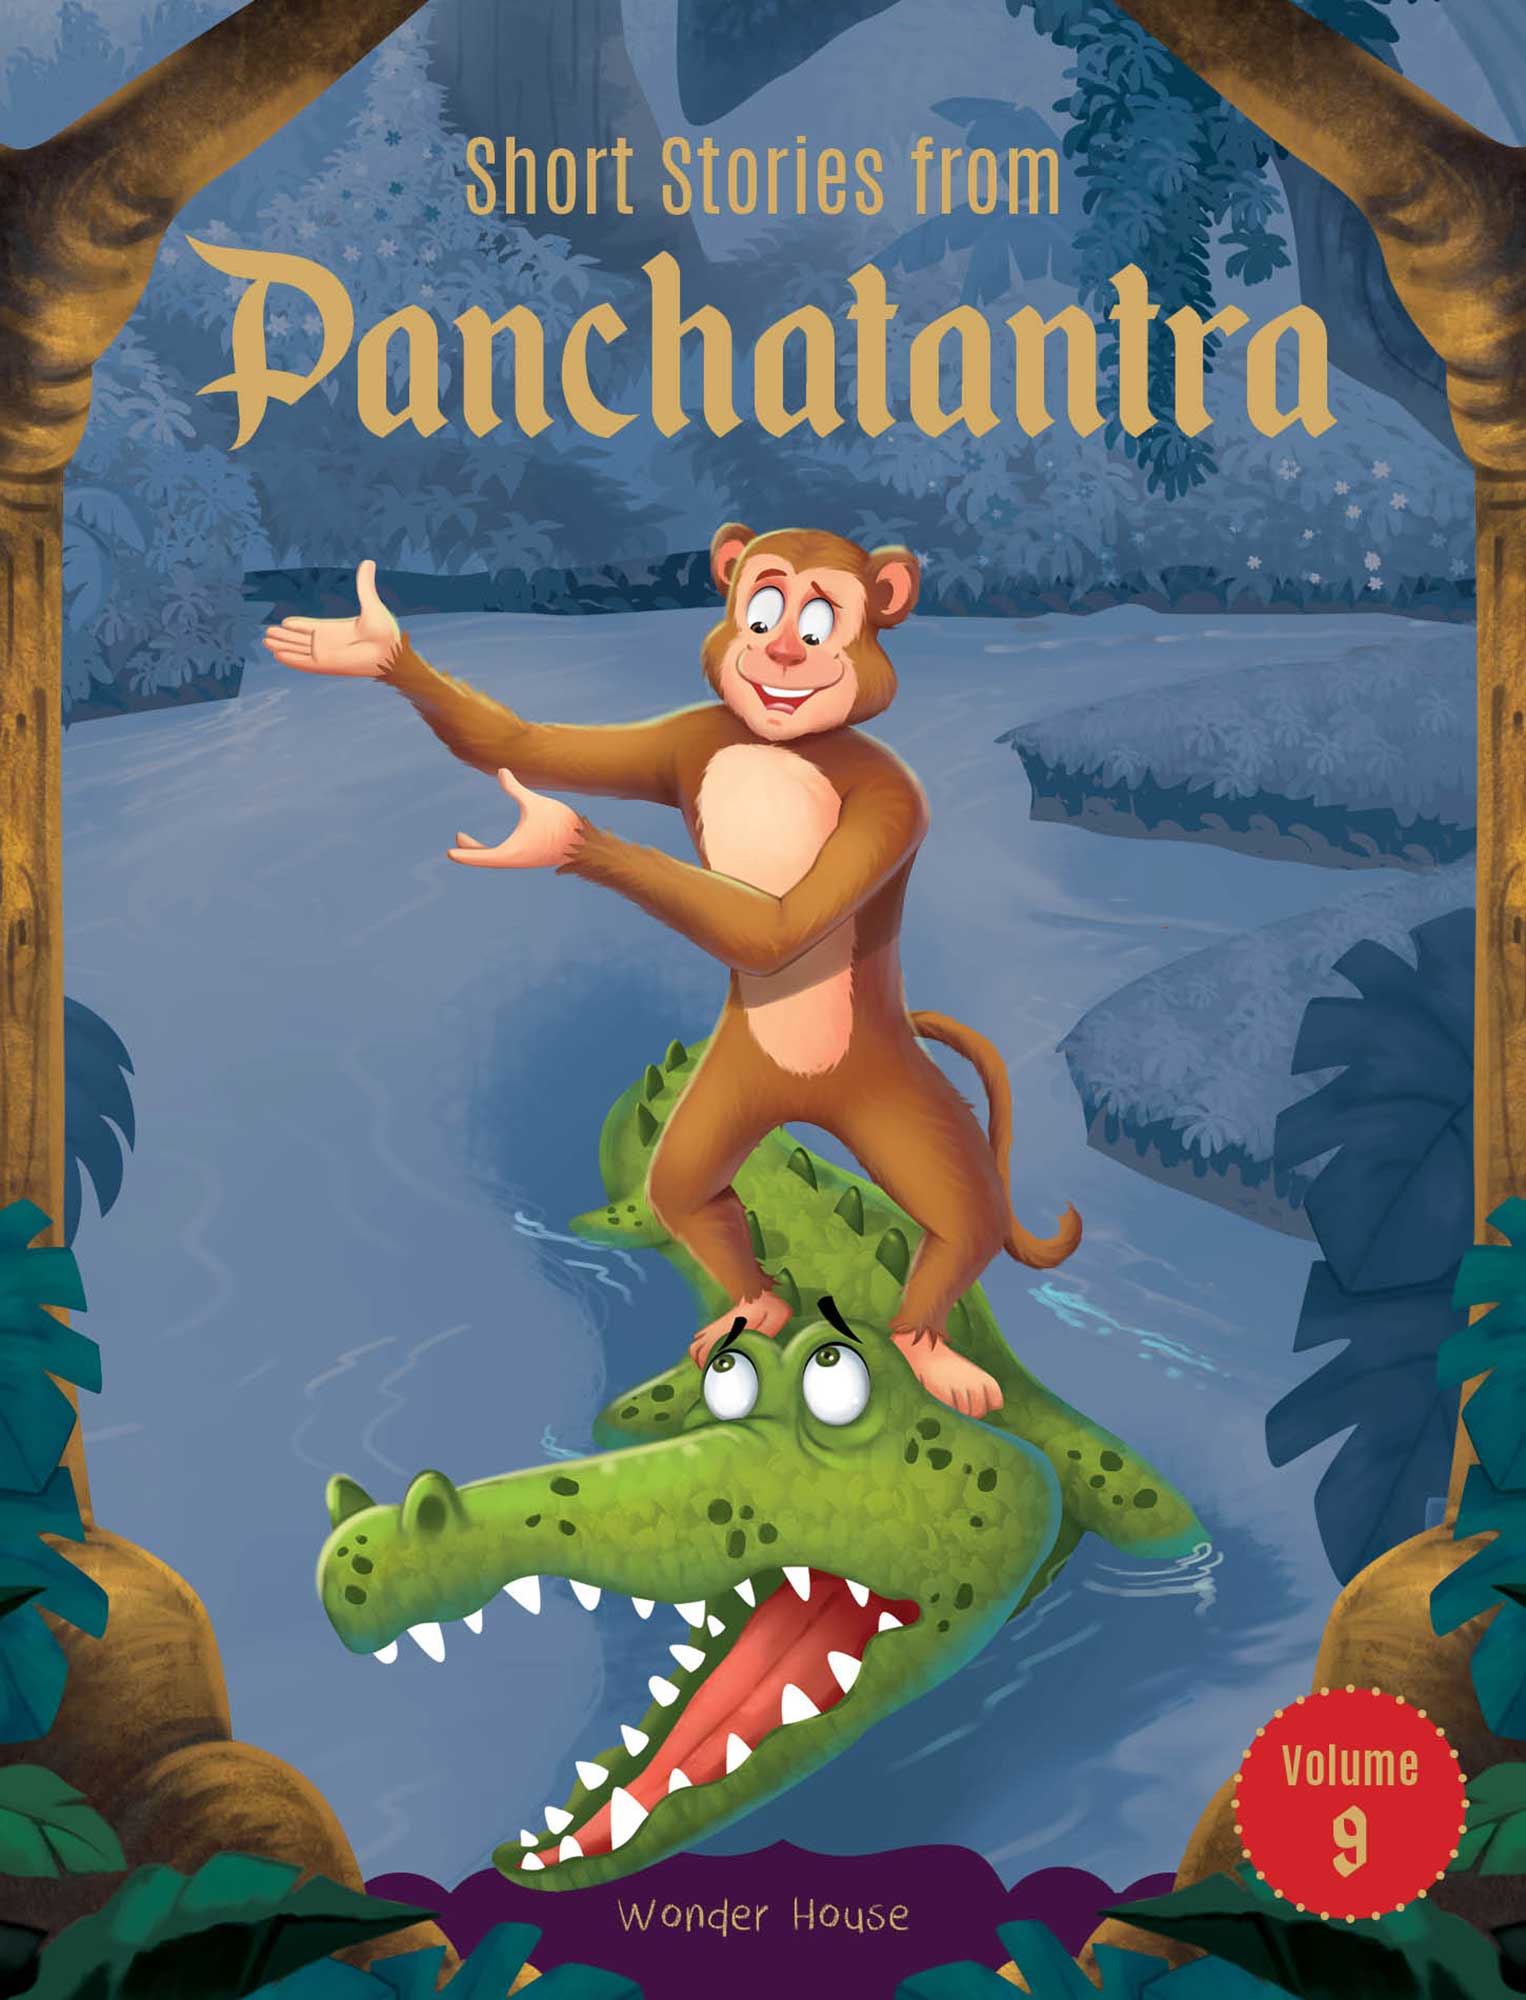 Short Stories From Panchatantra - Volume 9: Abridged Illustrated Stories For Children (With Morals)